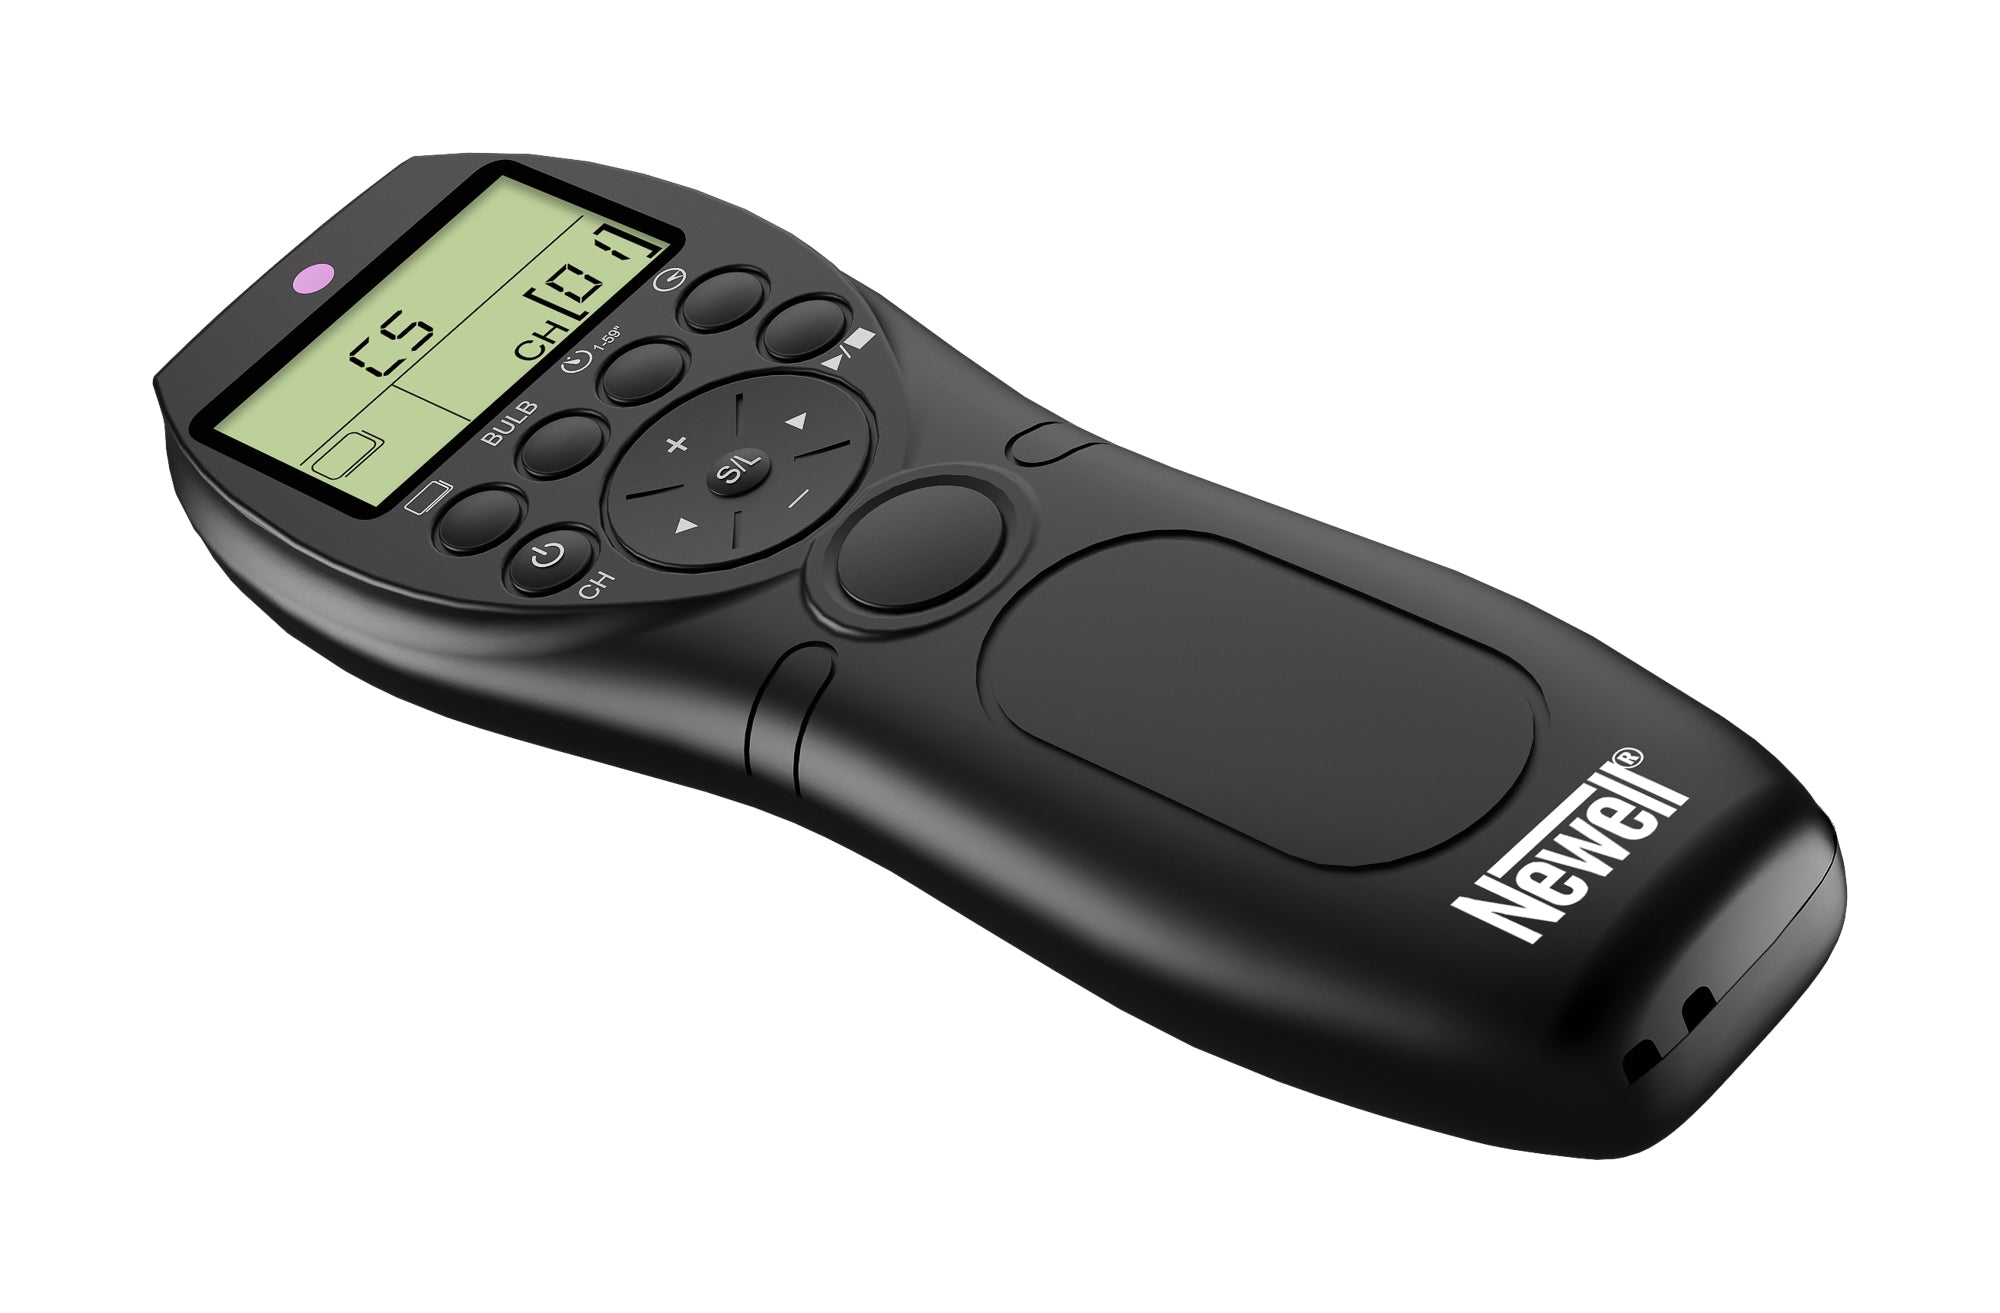 Newell wireless remote control with intervalometer for Nikon